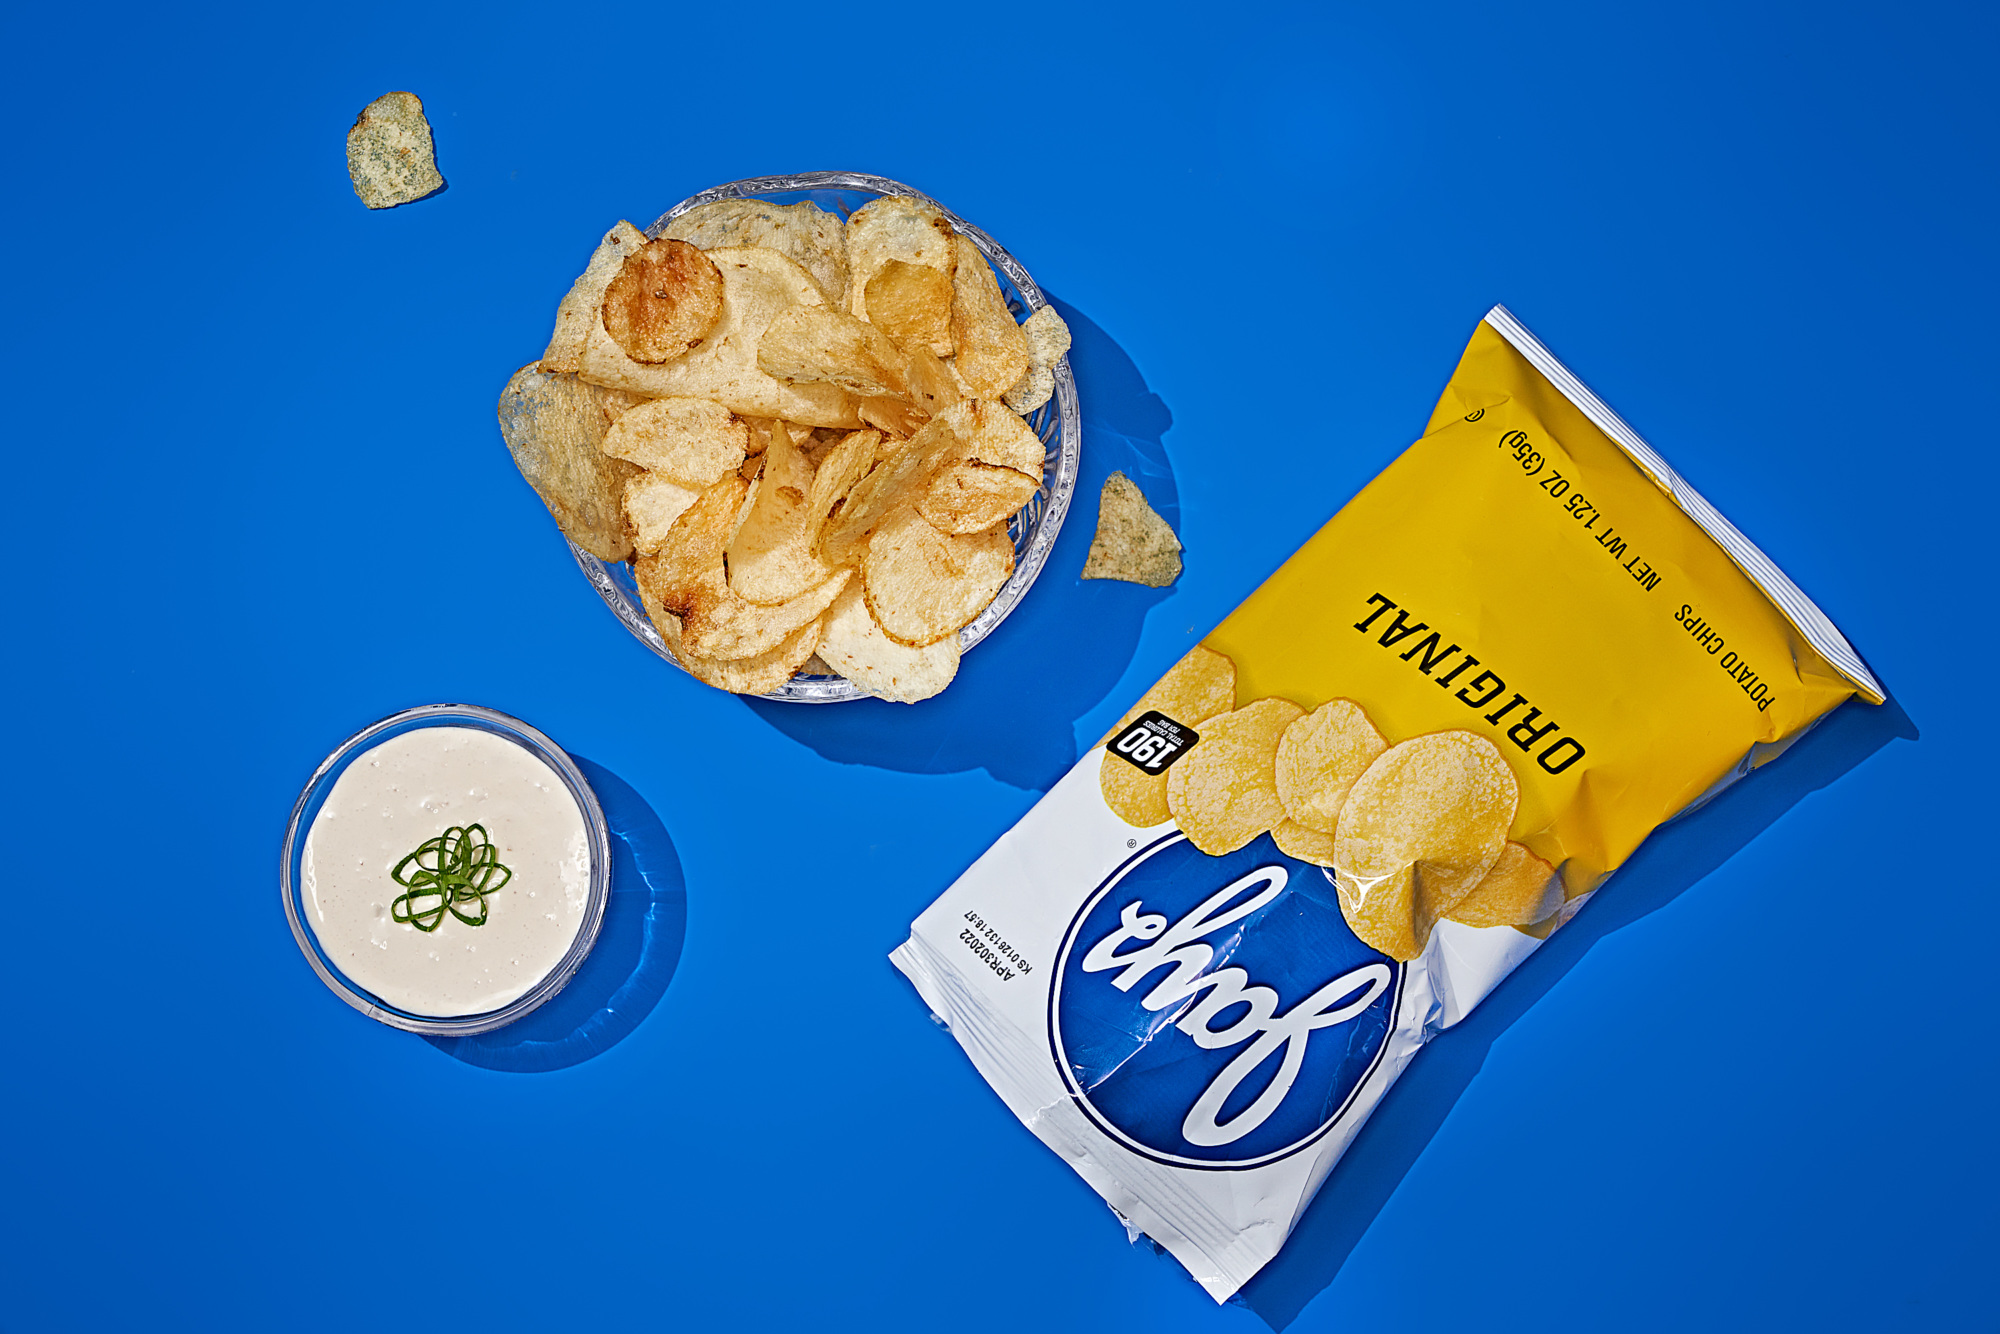 Chips & Goop were inspired by a dish that chef-owner Greg Baxtrom's mom, Patti Ann, would make at home.